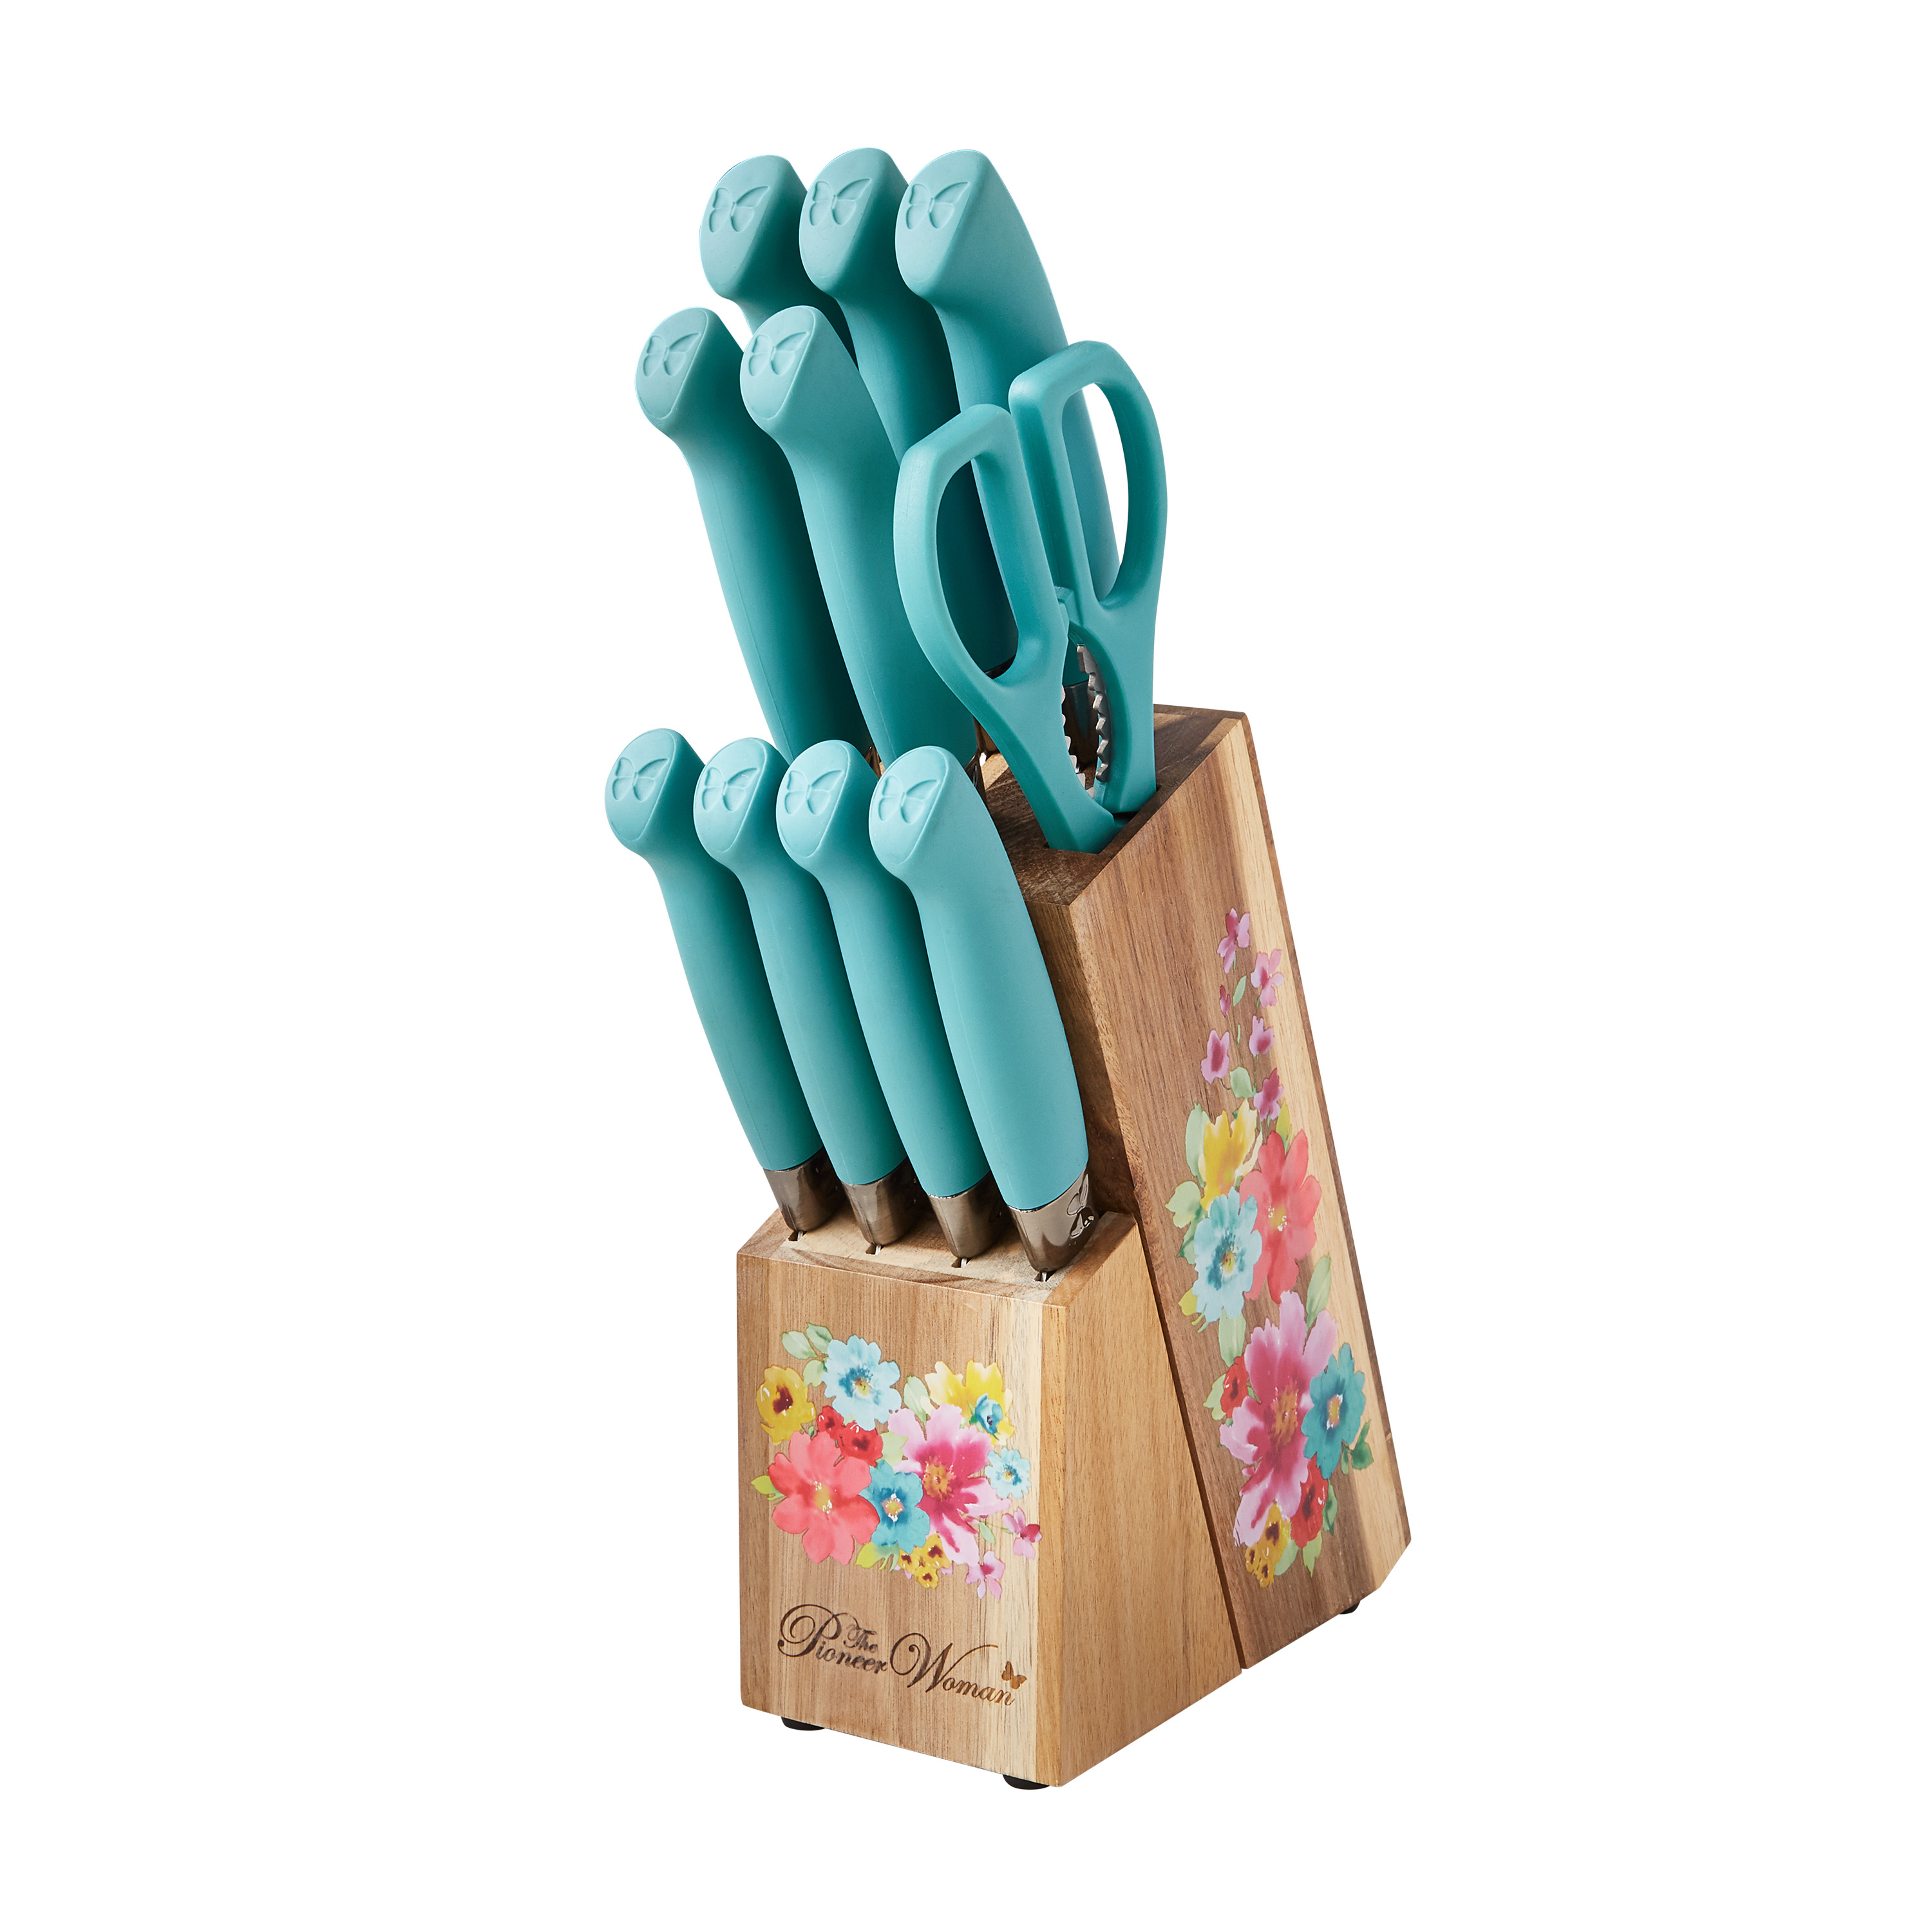 The Pioneer Woman Breezy Blossoms 11-Piece Stainless Steel Knife Block Set, Teal - image 1 of 5